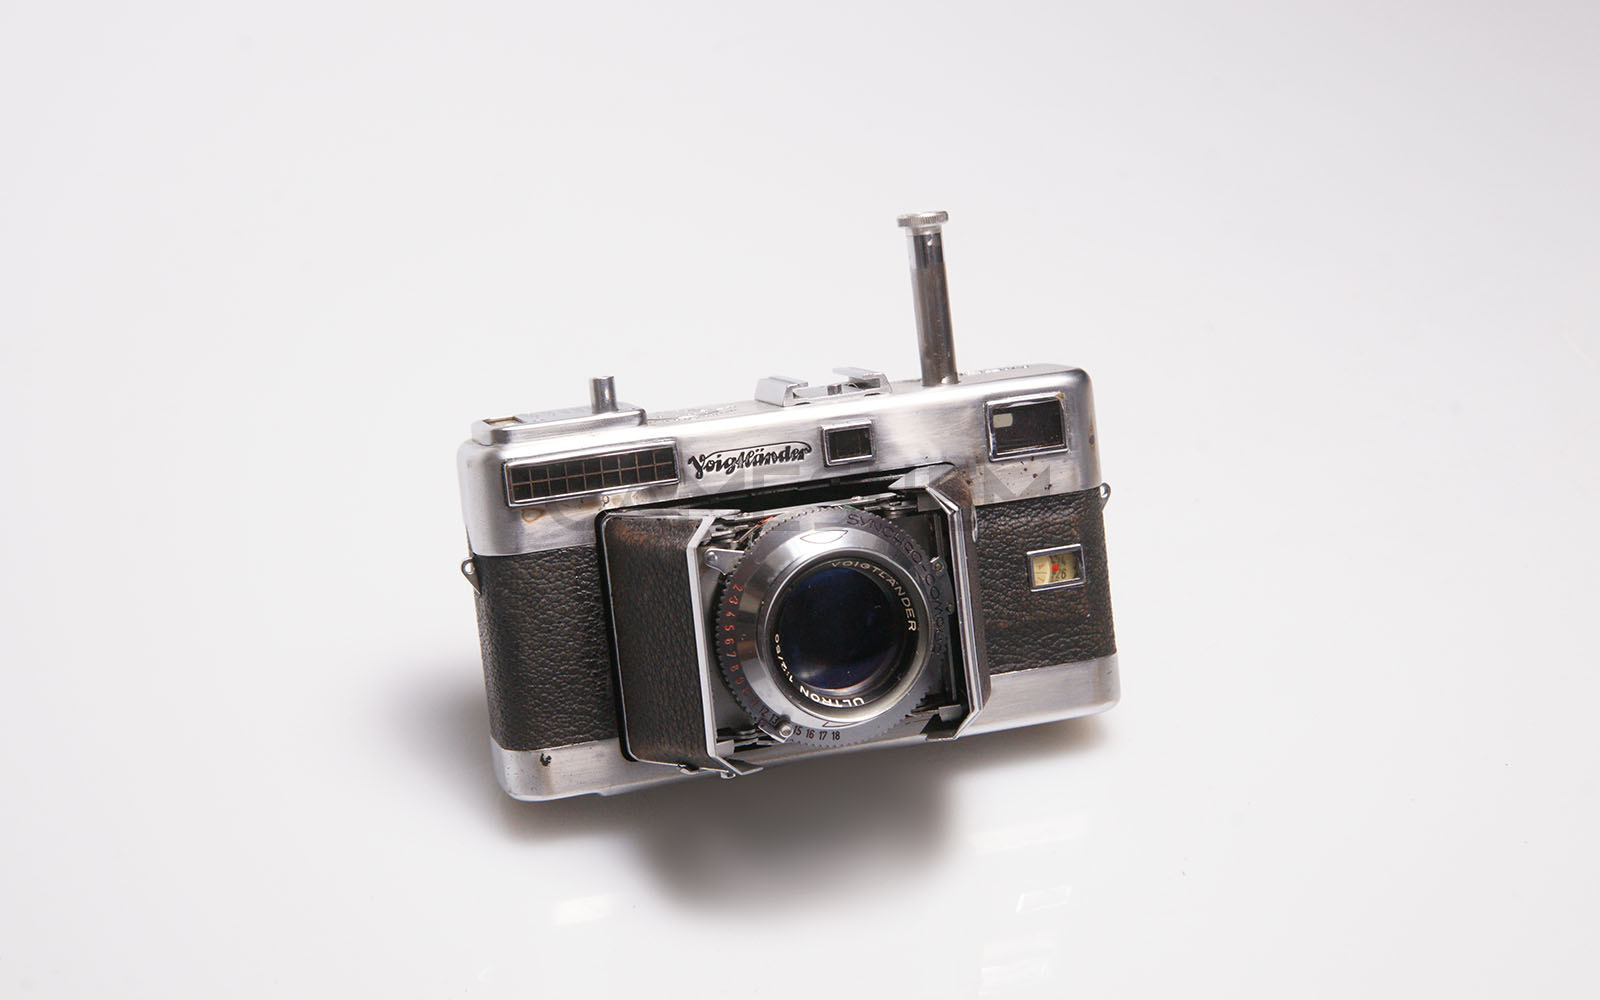 Voigtlander Vitessa represents one of the most famous cameras in 